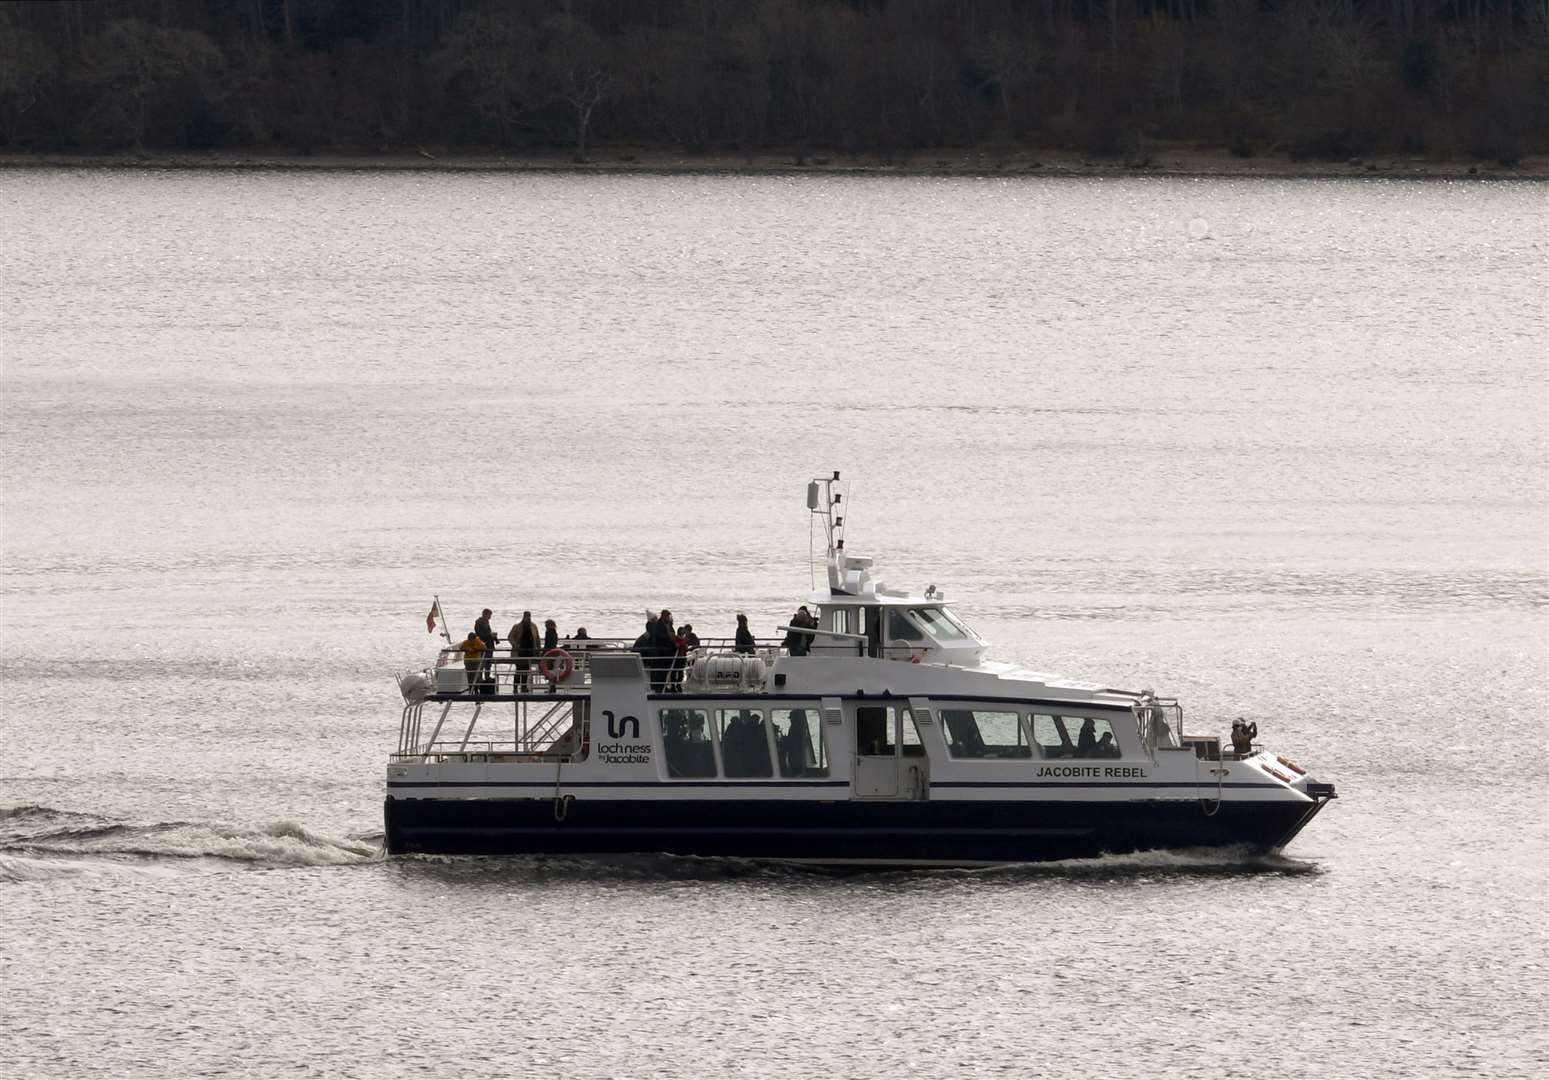 Loch Ness By Jacobite expects more than 260,000 visitors will take a cruise in 2023.